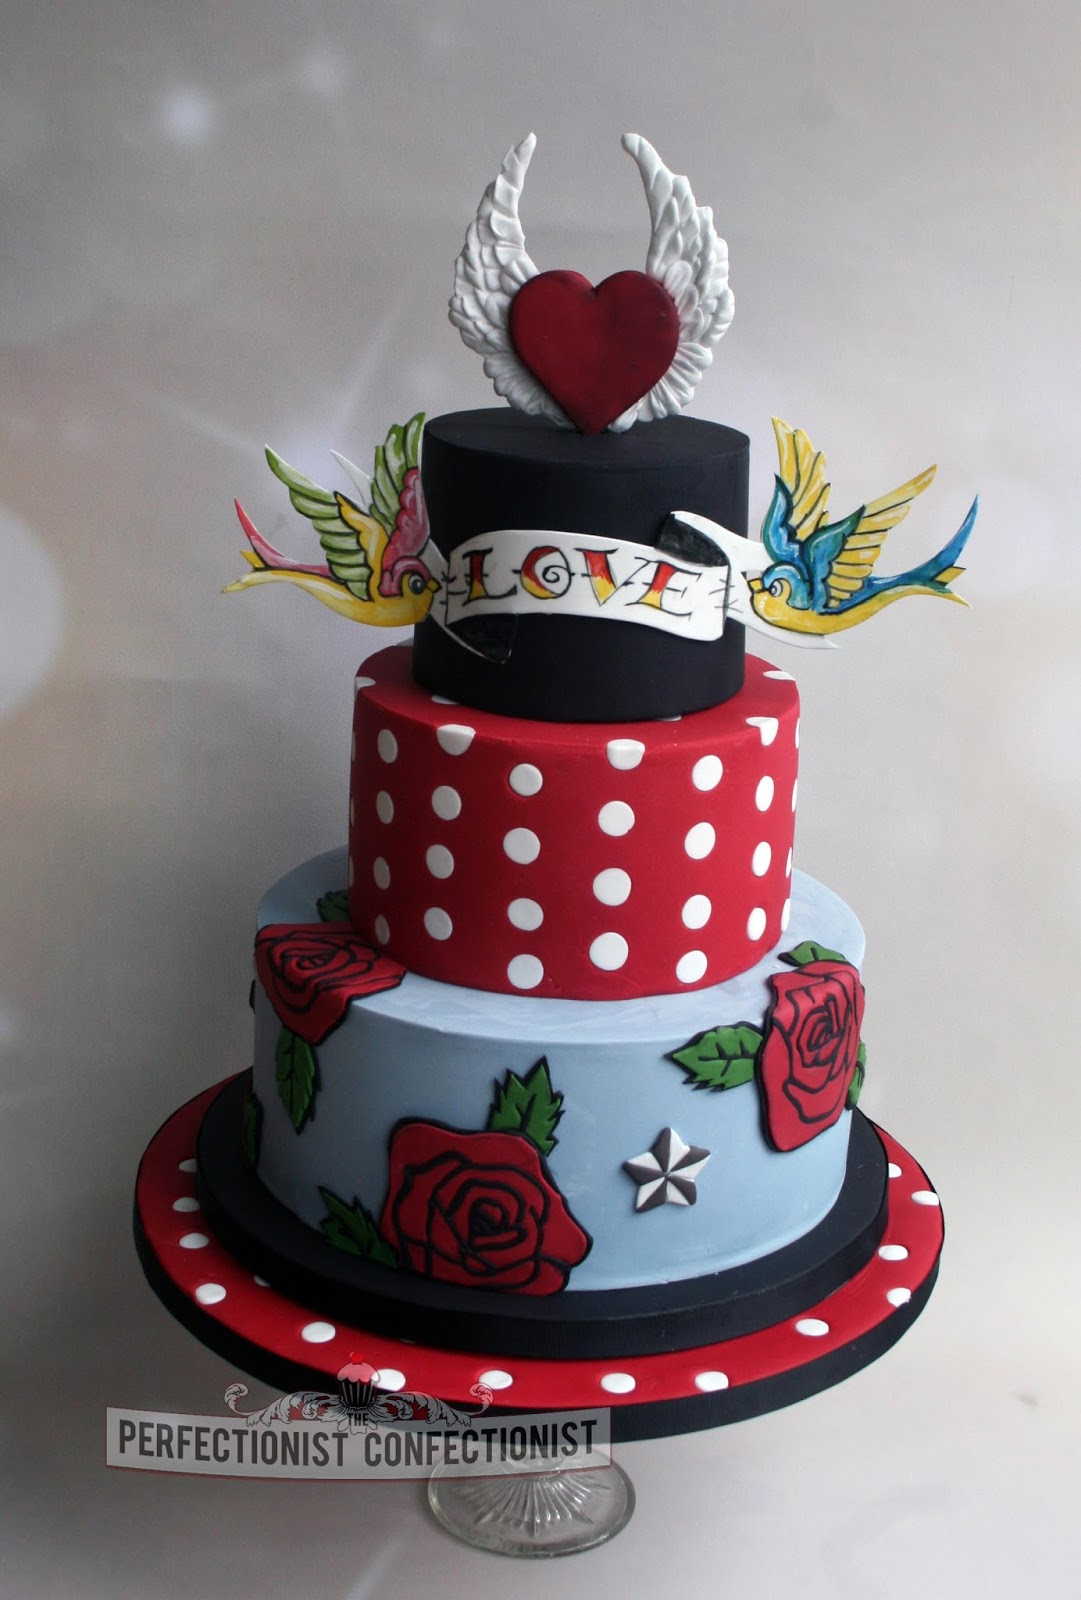 Rockabilly Wedding Cakes
 The Perfectionist Confectionist Rockabilly Wedding Cake